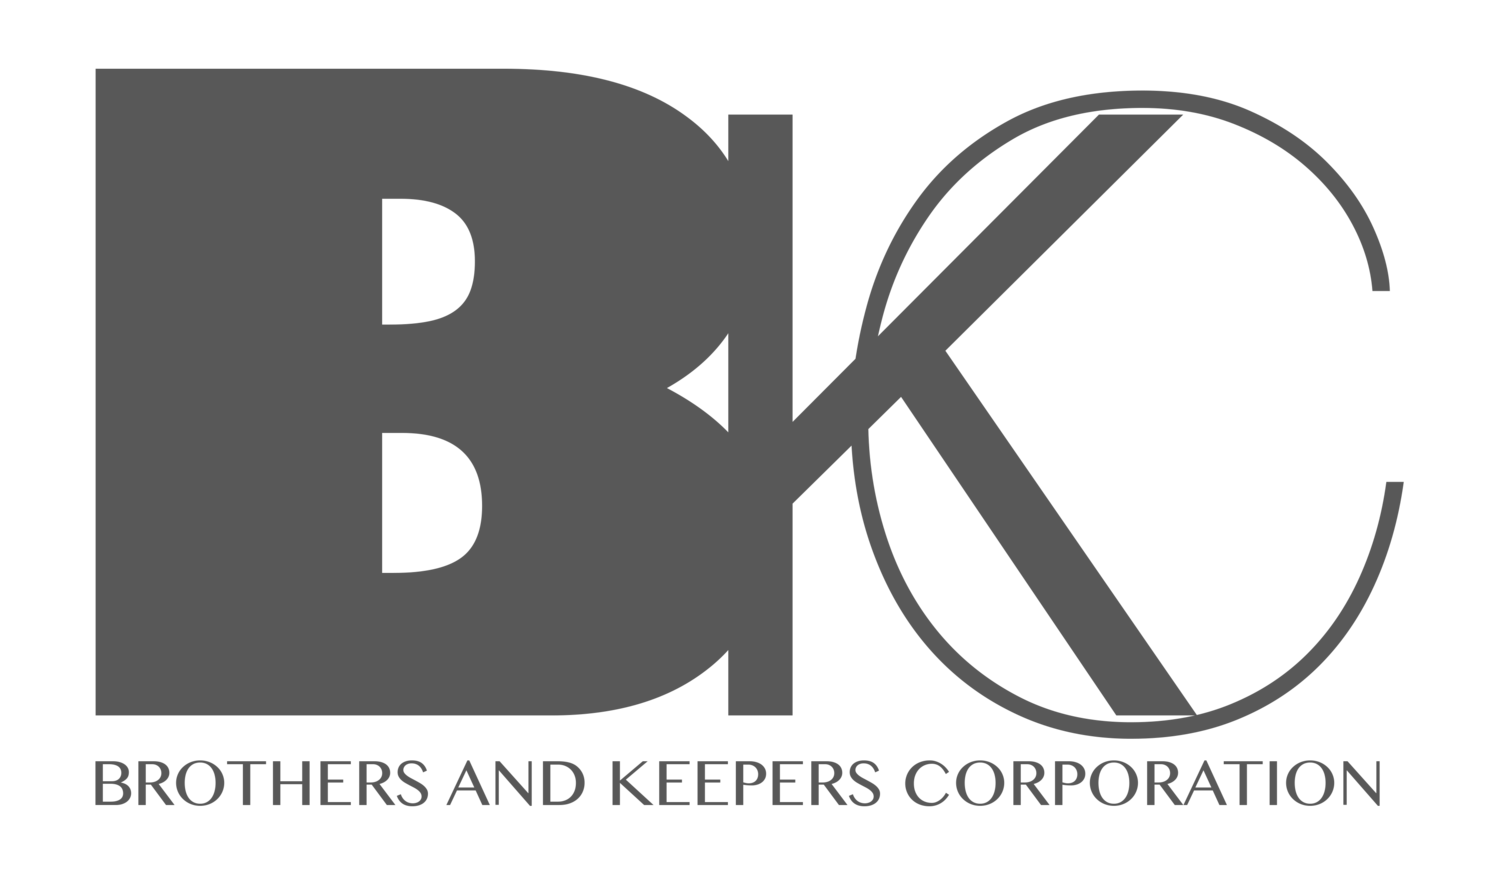 BROTHERS & KEEPERS CORPORATION